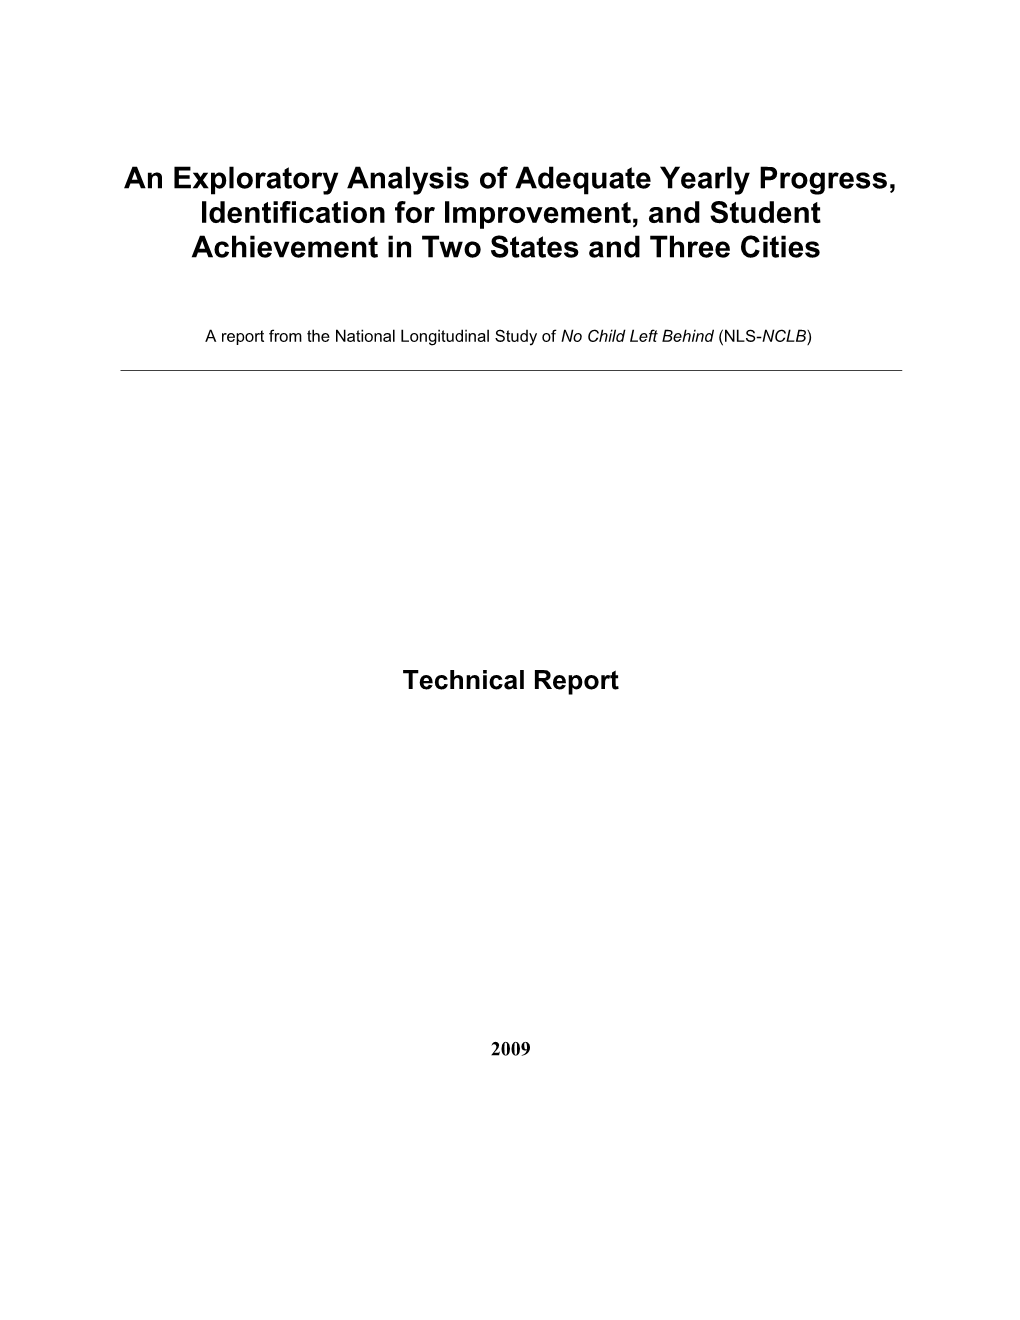 An Exploratory Analysis of Adequate Yearly Progress, Identification for Improvement, And